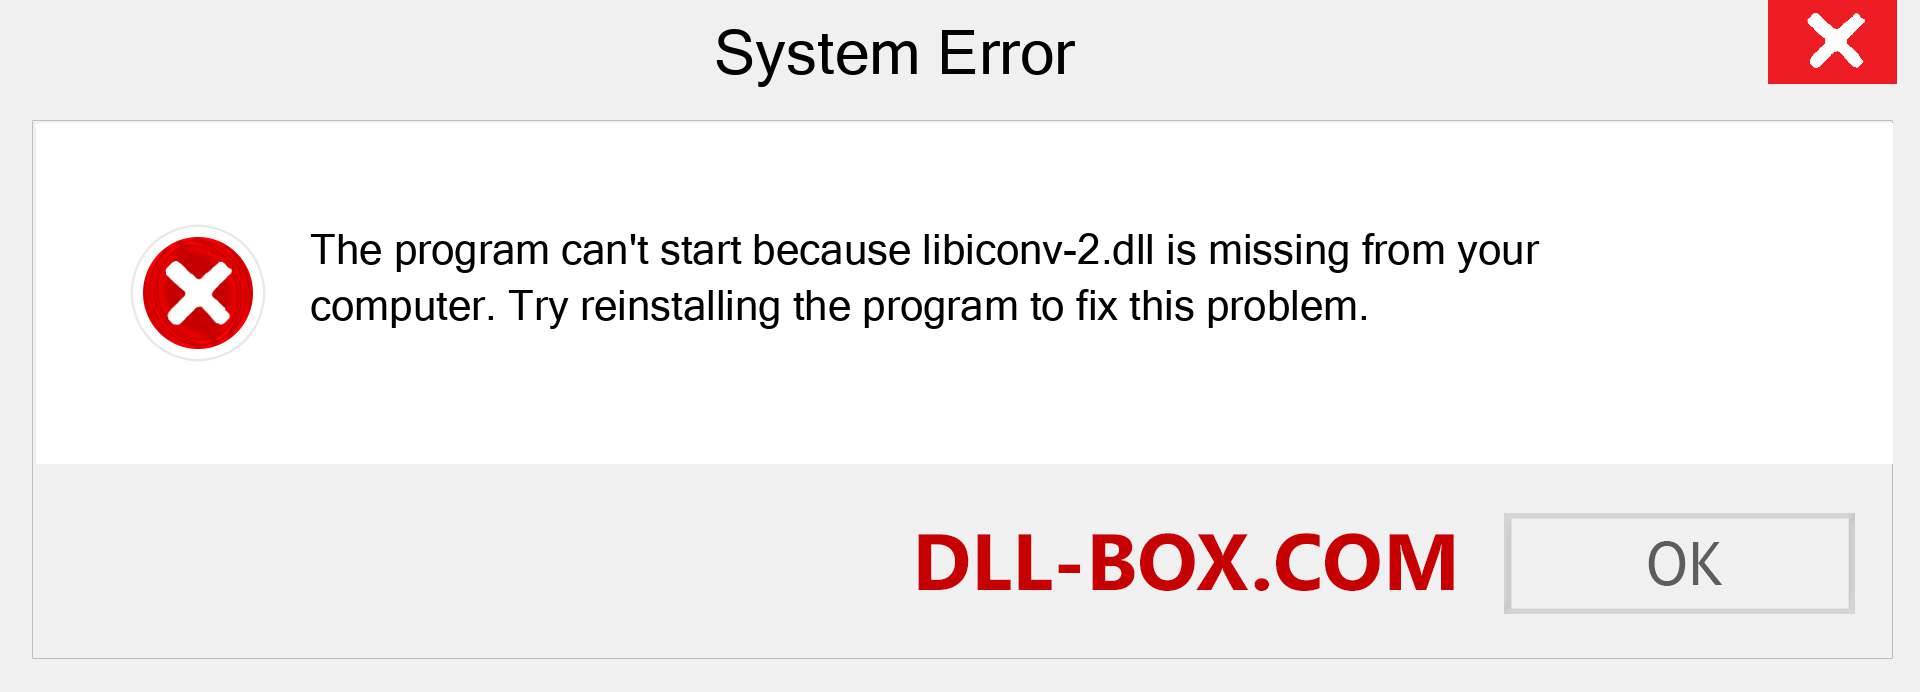  libiconv-2.dll file is missing?. Download for Windows 7, 8, 10 - Fix  libiconv-2 dll Missing Error on Windows, photos, images